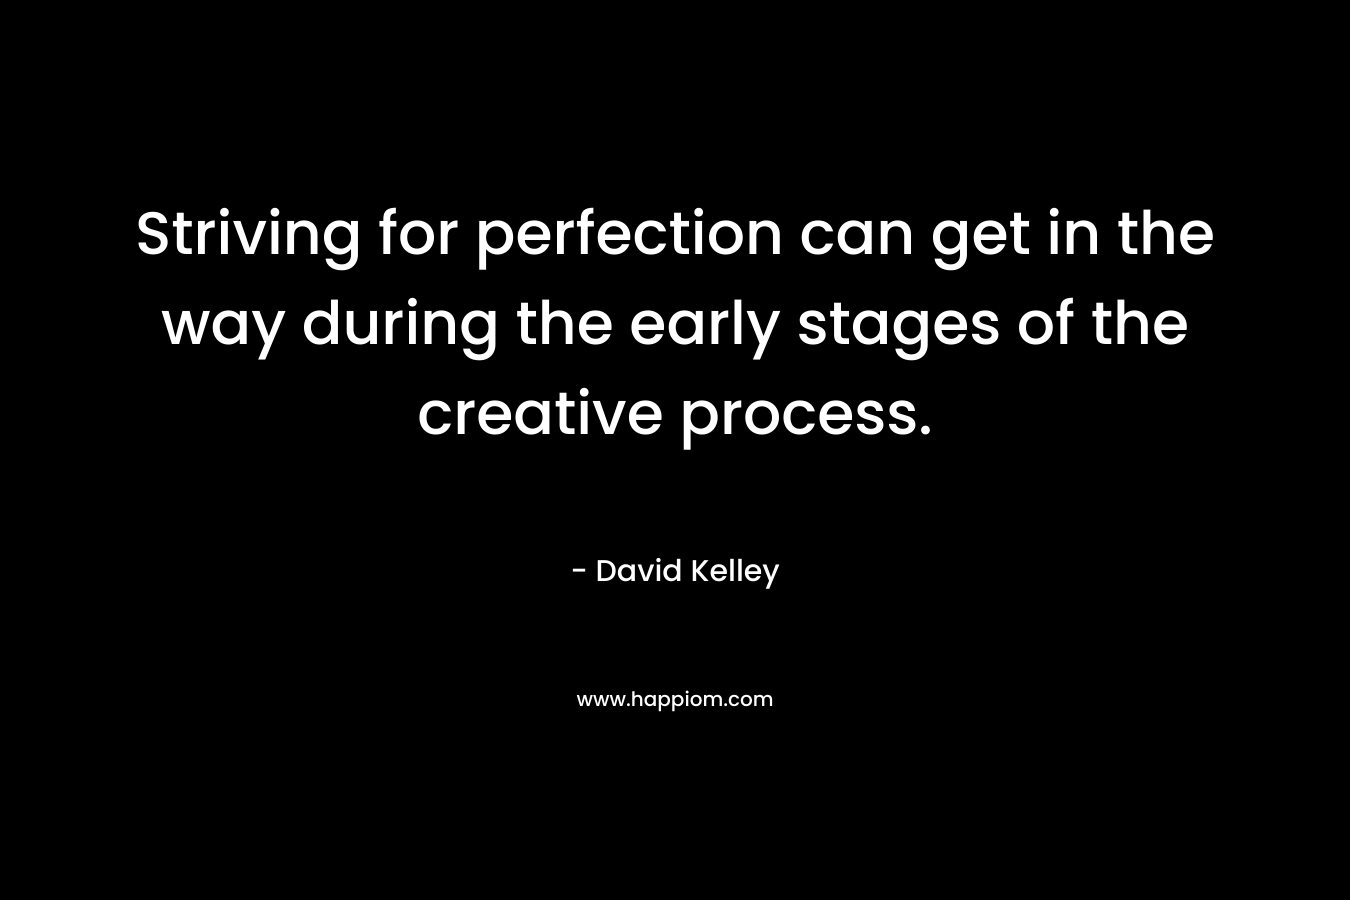 Striving for perfection can get in the way during the early stages of the creative process.